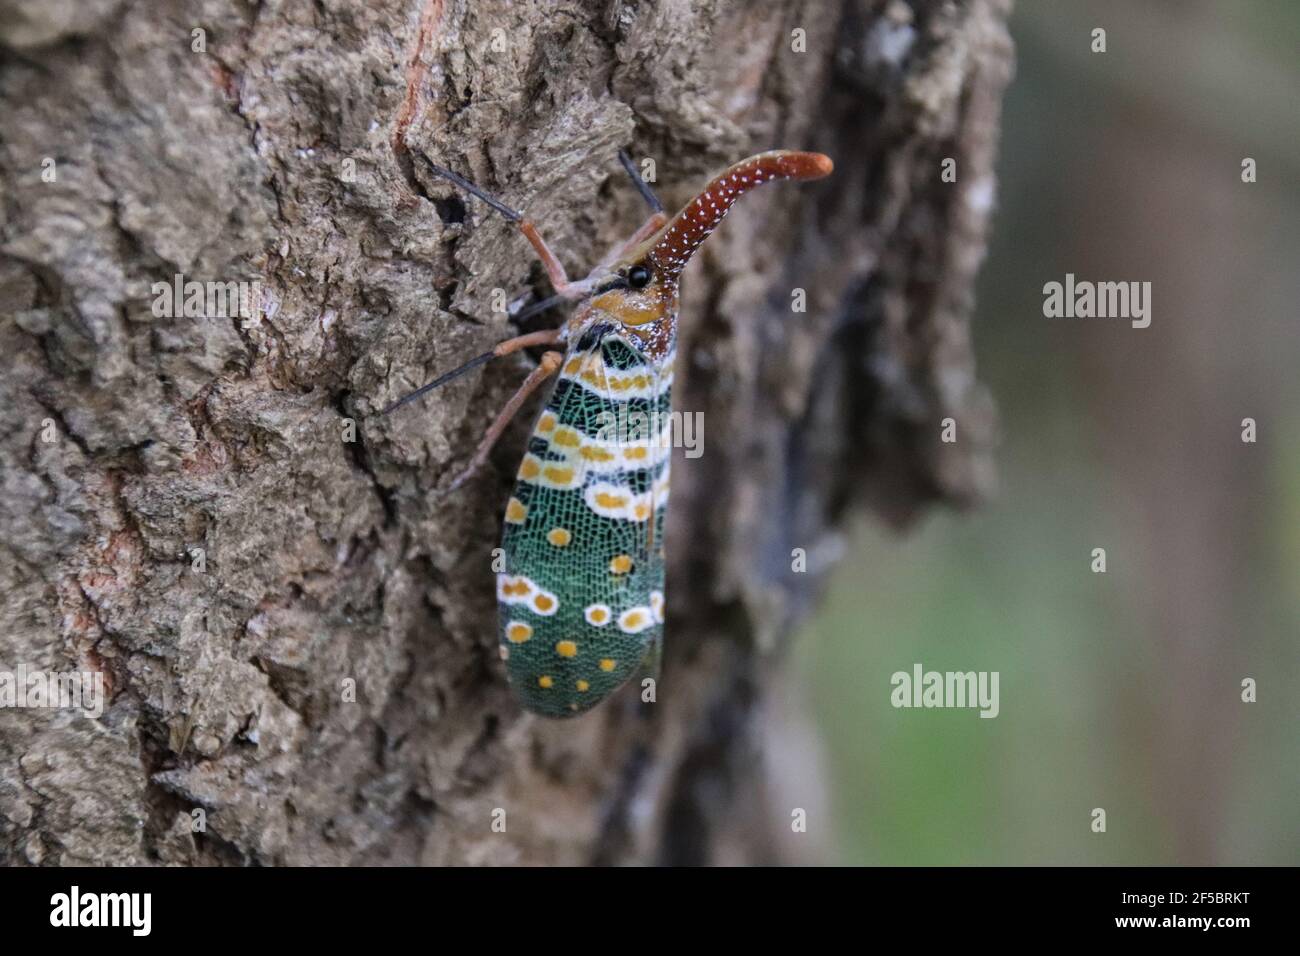 Selective focus of a Pyrops candelaria (Laternaria candelaria) planthopper on a tree bark Stock Photo